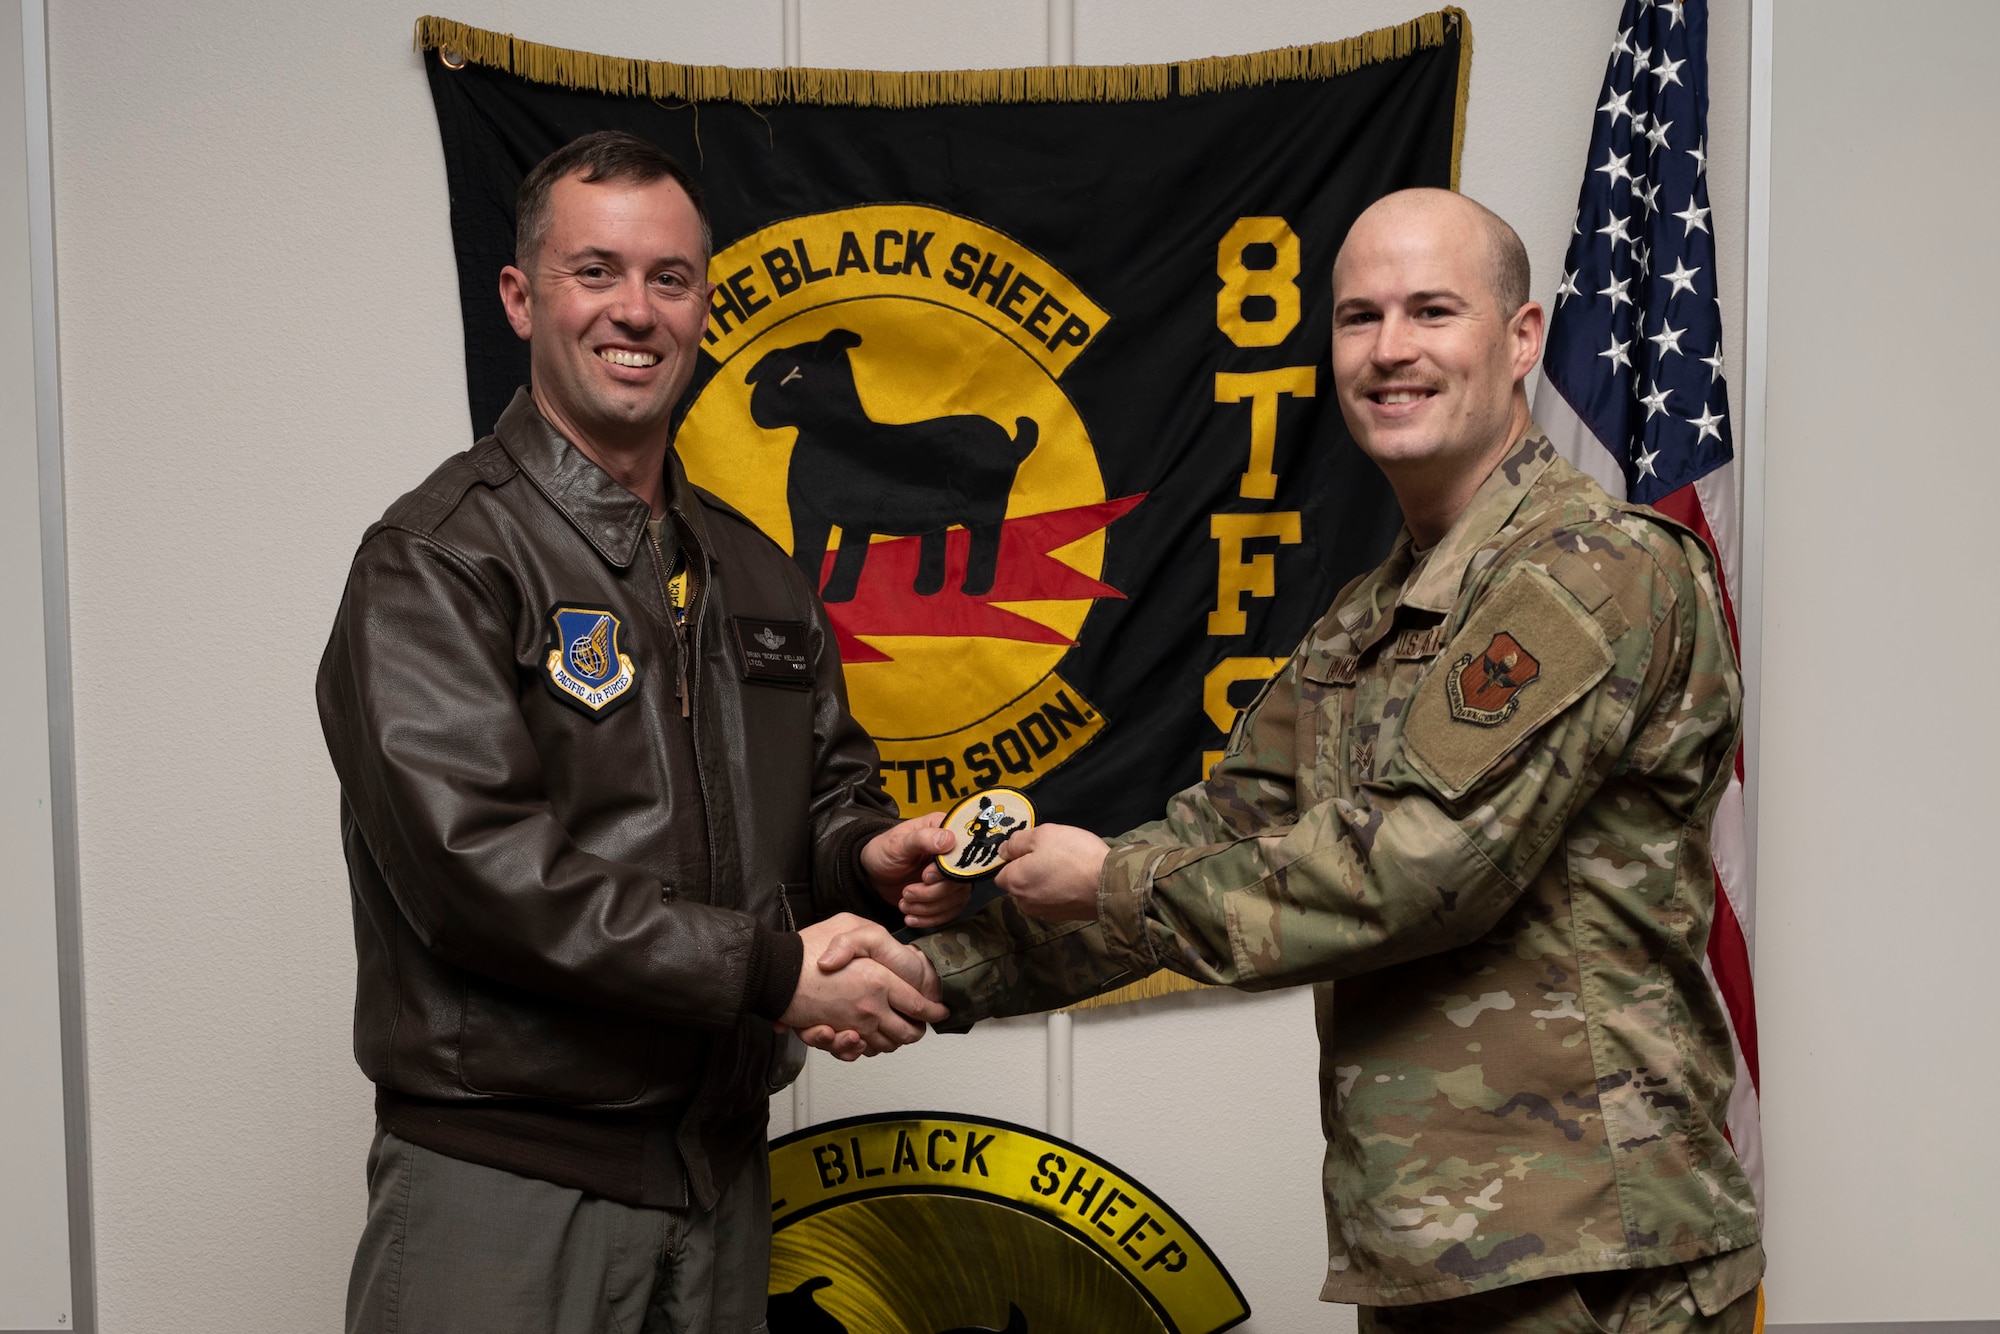 U.S. Air Force Senior Airman Holden Godwin, 8th Aircraft Maintenance Unit crew chief, right, poses for a photo with U.S. Air Force Lt. Col. Brian Kellam, 8th Fighter Squadron pilot, during a Dedicated Crew Chief Appointment ceremony at Holloman Air Force Base, New Mexico, Jan. 3, 2022. To receive the title of DCC, a crew chief must demonstrate a history of superior performance in their career, comply with all safety practices and complete all required training. (U.S. Air Force photo by Senior Airman Antonio Salfran)